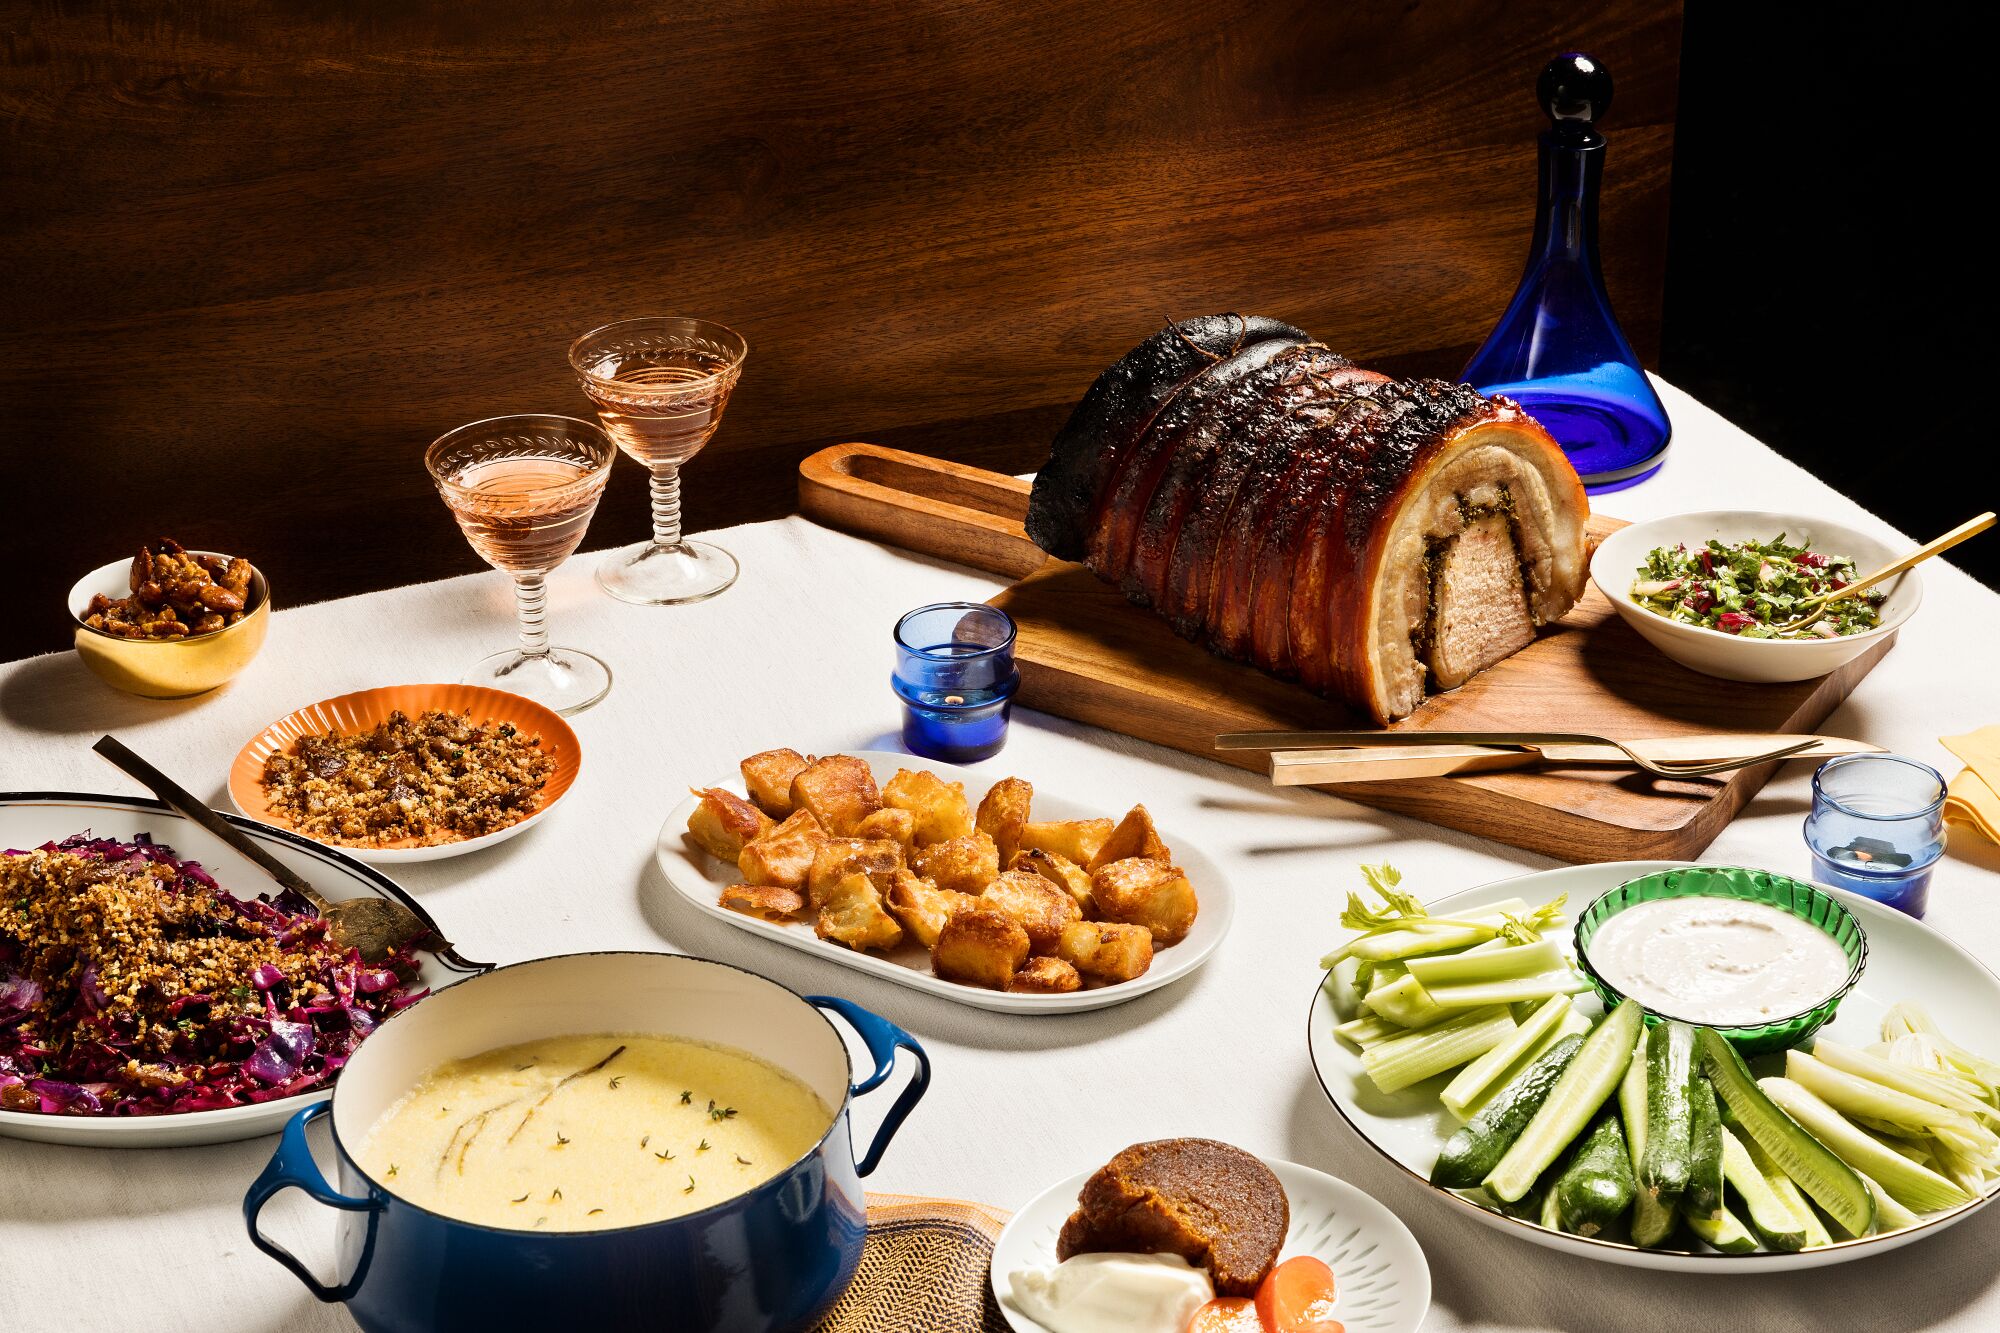 A holiday table with a feast of porchetta, polenta, roasted potatoes and more.